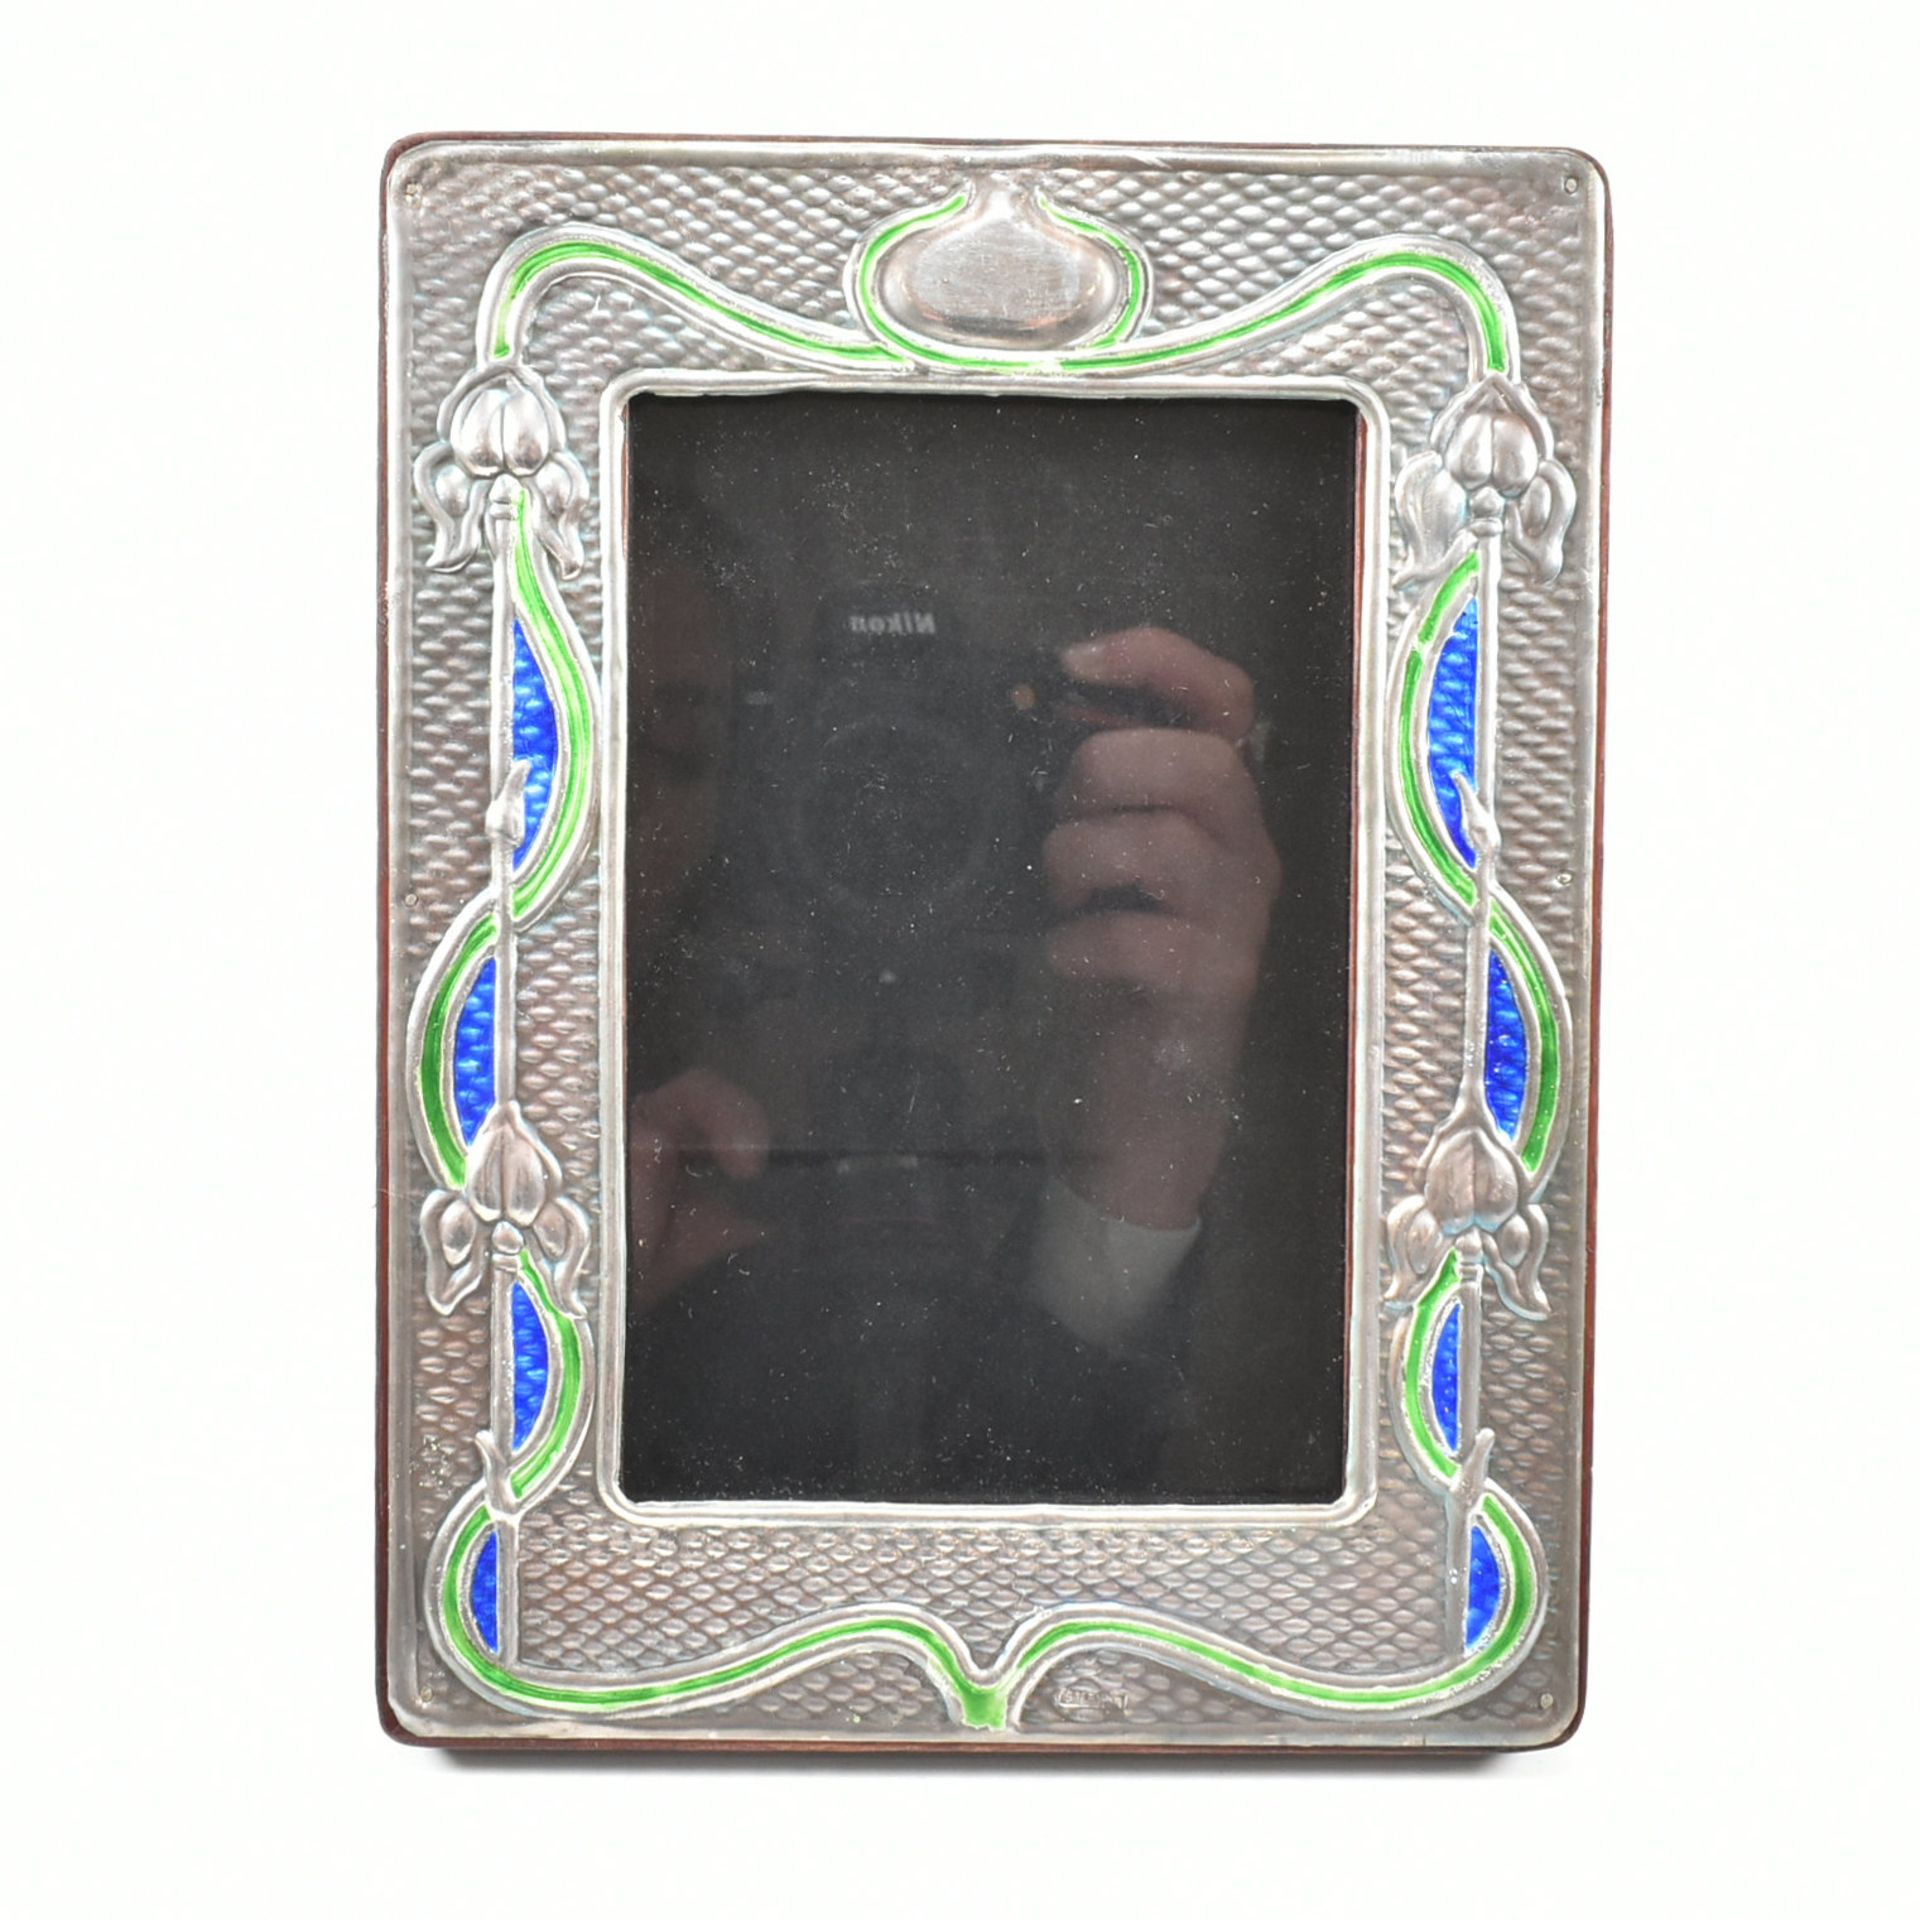 ART NOUVEAU STYLE STERLING SILVER & ENAMEL PICTURE FRAME - Image 2 of 7